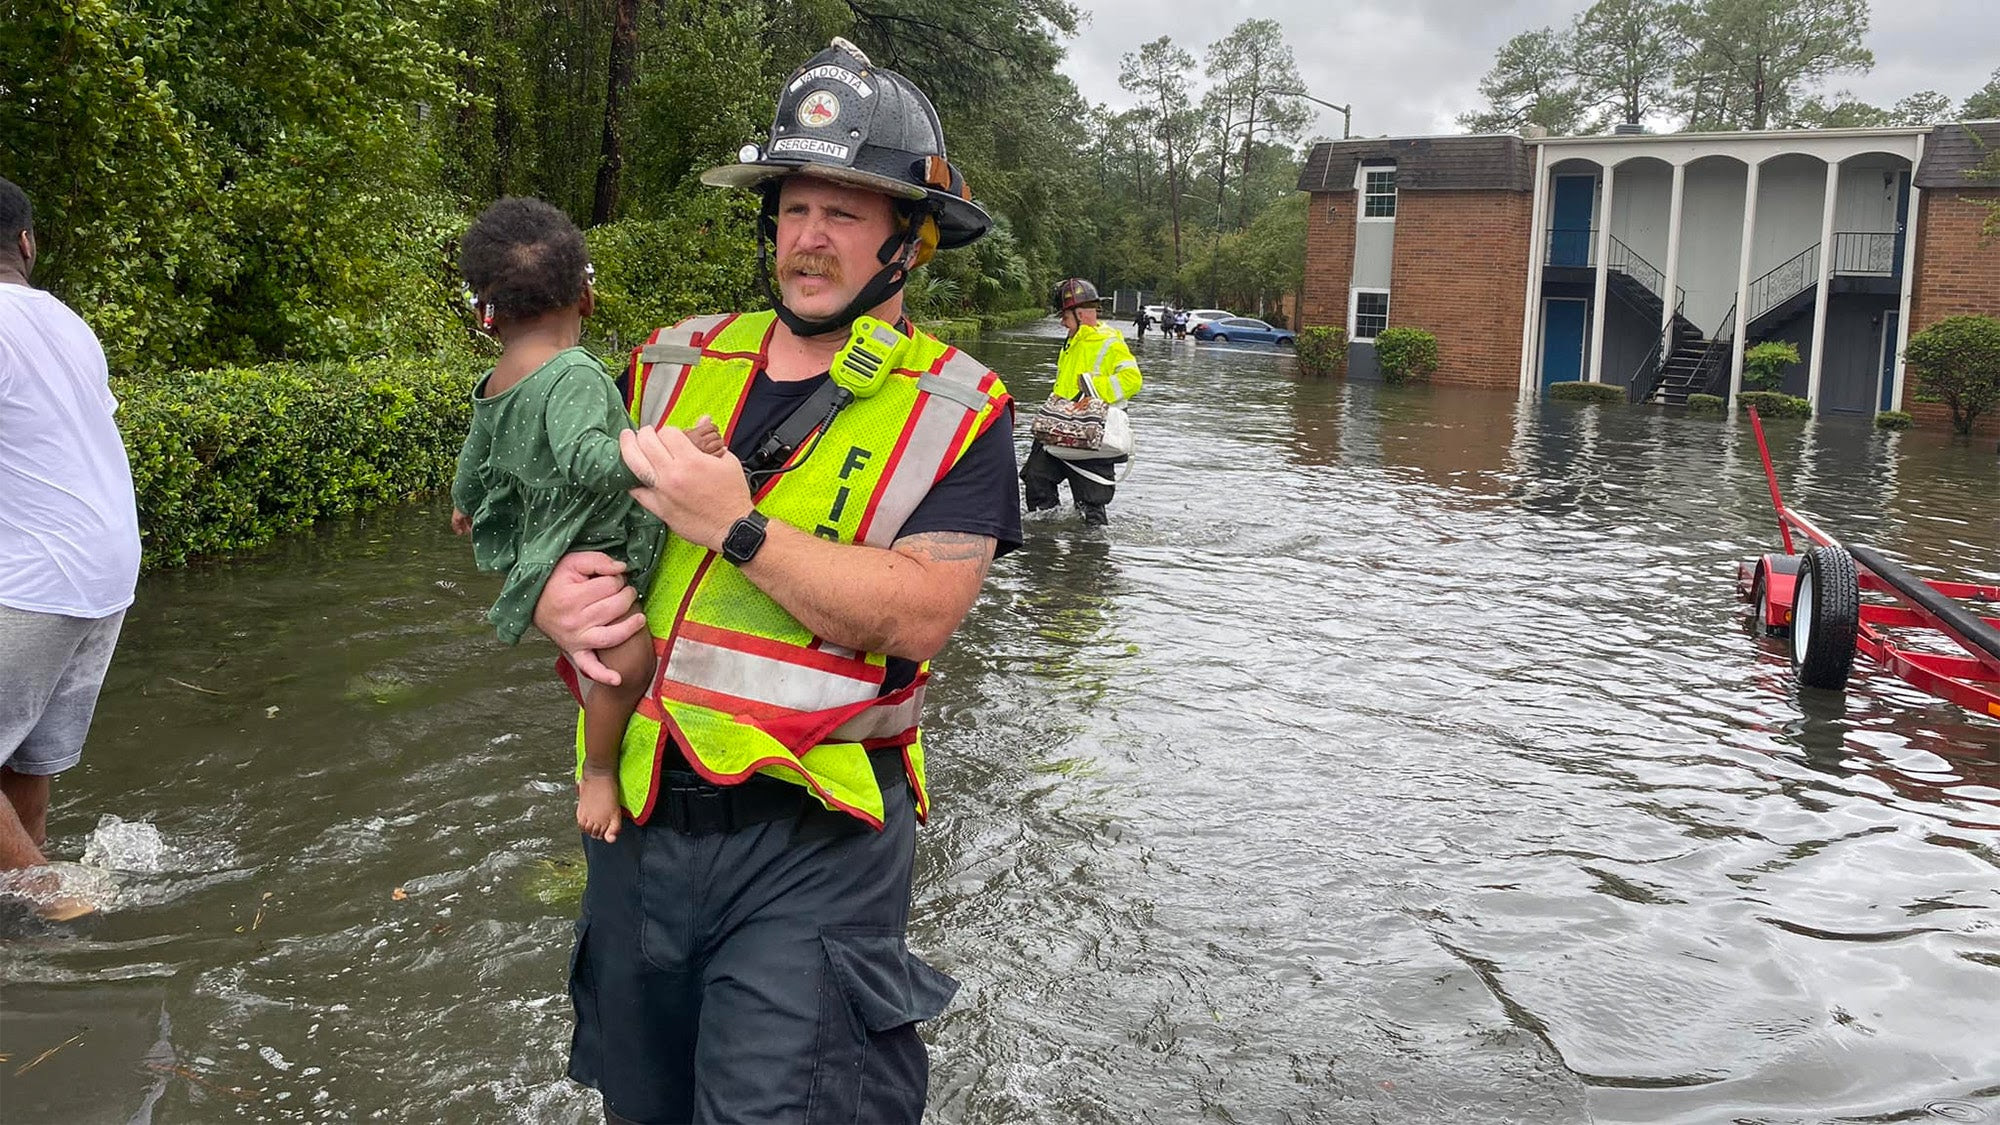 a first responder carries a small child away from flooding.